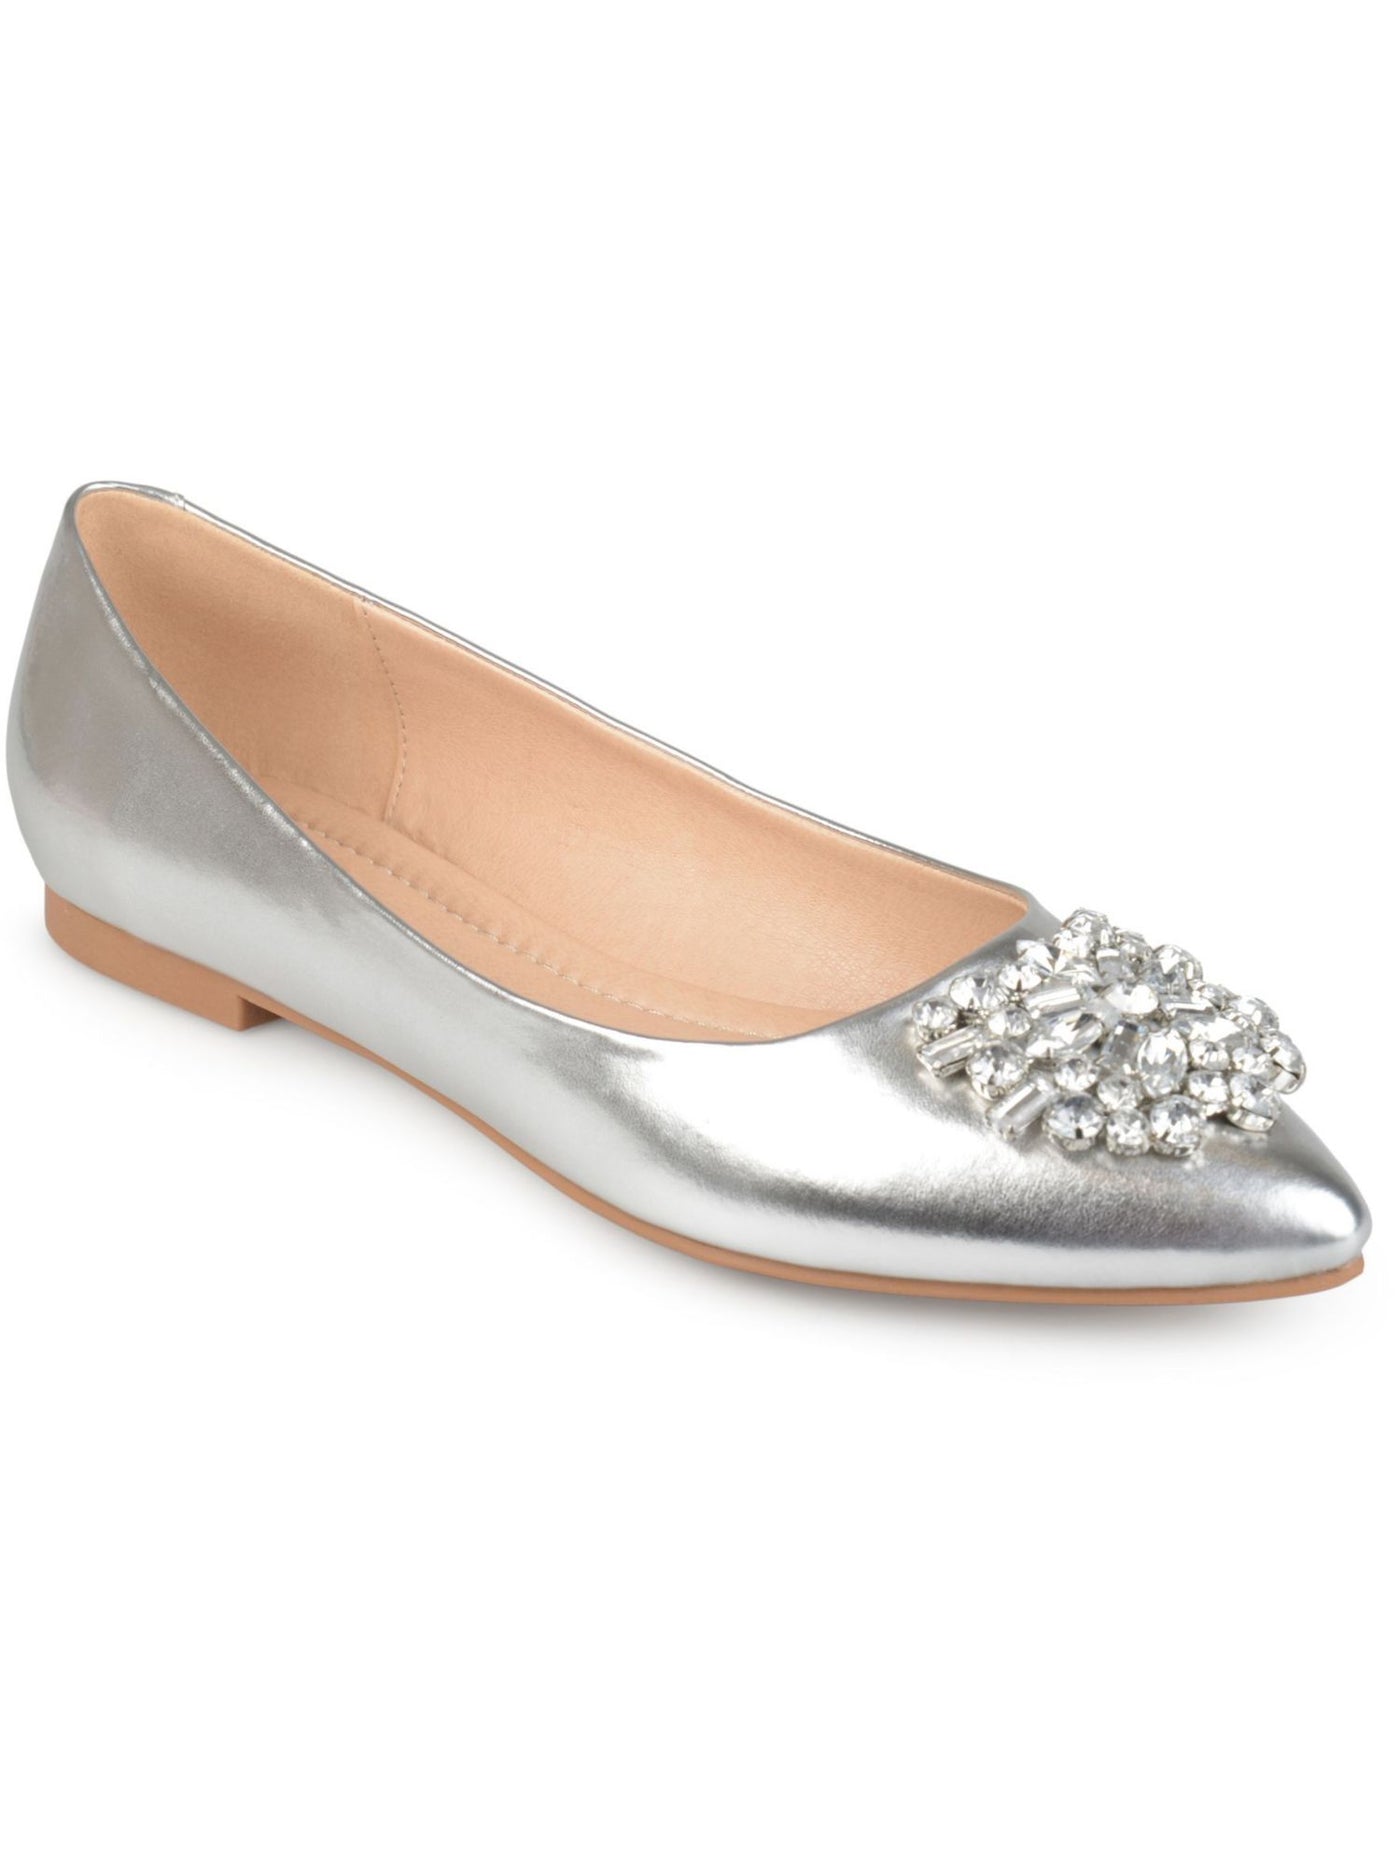 JOURNEE COLLECTION Womens Silver Padded Gem Accent Renzo Pointed Toe Block Heel Slip On Ballet Flats 8.5